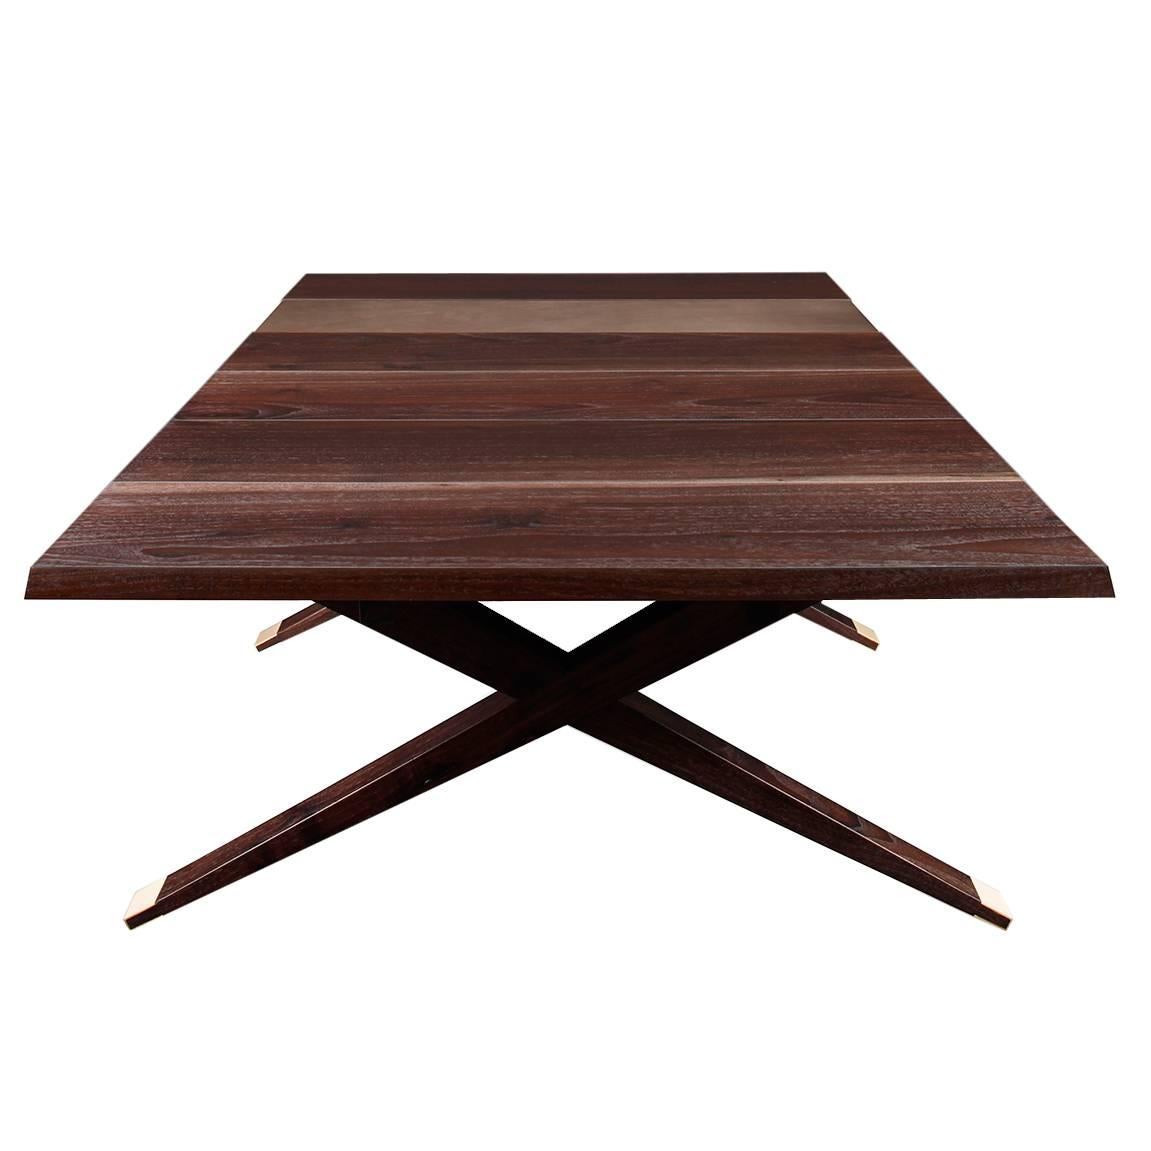 FLOOR SAMPLE SALE!!

Floor model with very light use, overall great condition.

This Studio Roeper Classic is all about crisp lines, carefully chosen angles and delicate proportions. Studio Roeper's signature style of blending wood and metal is